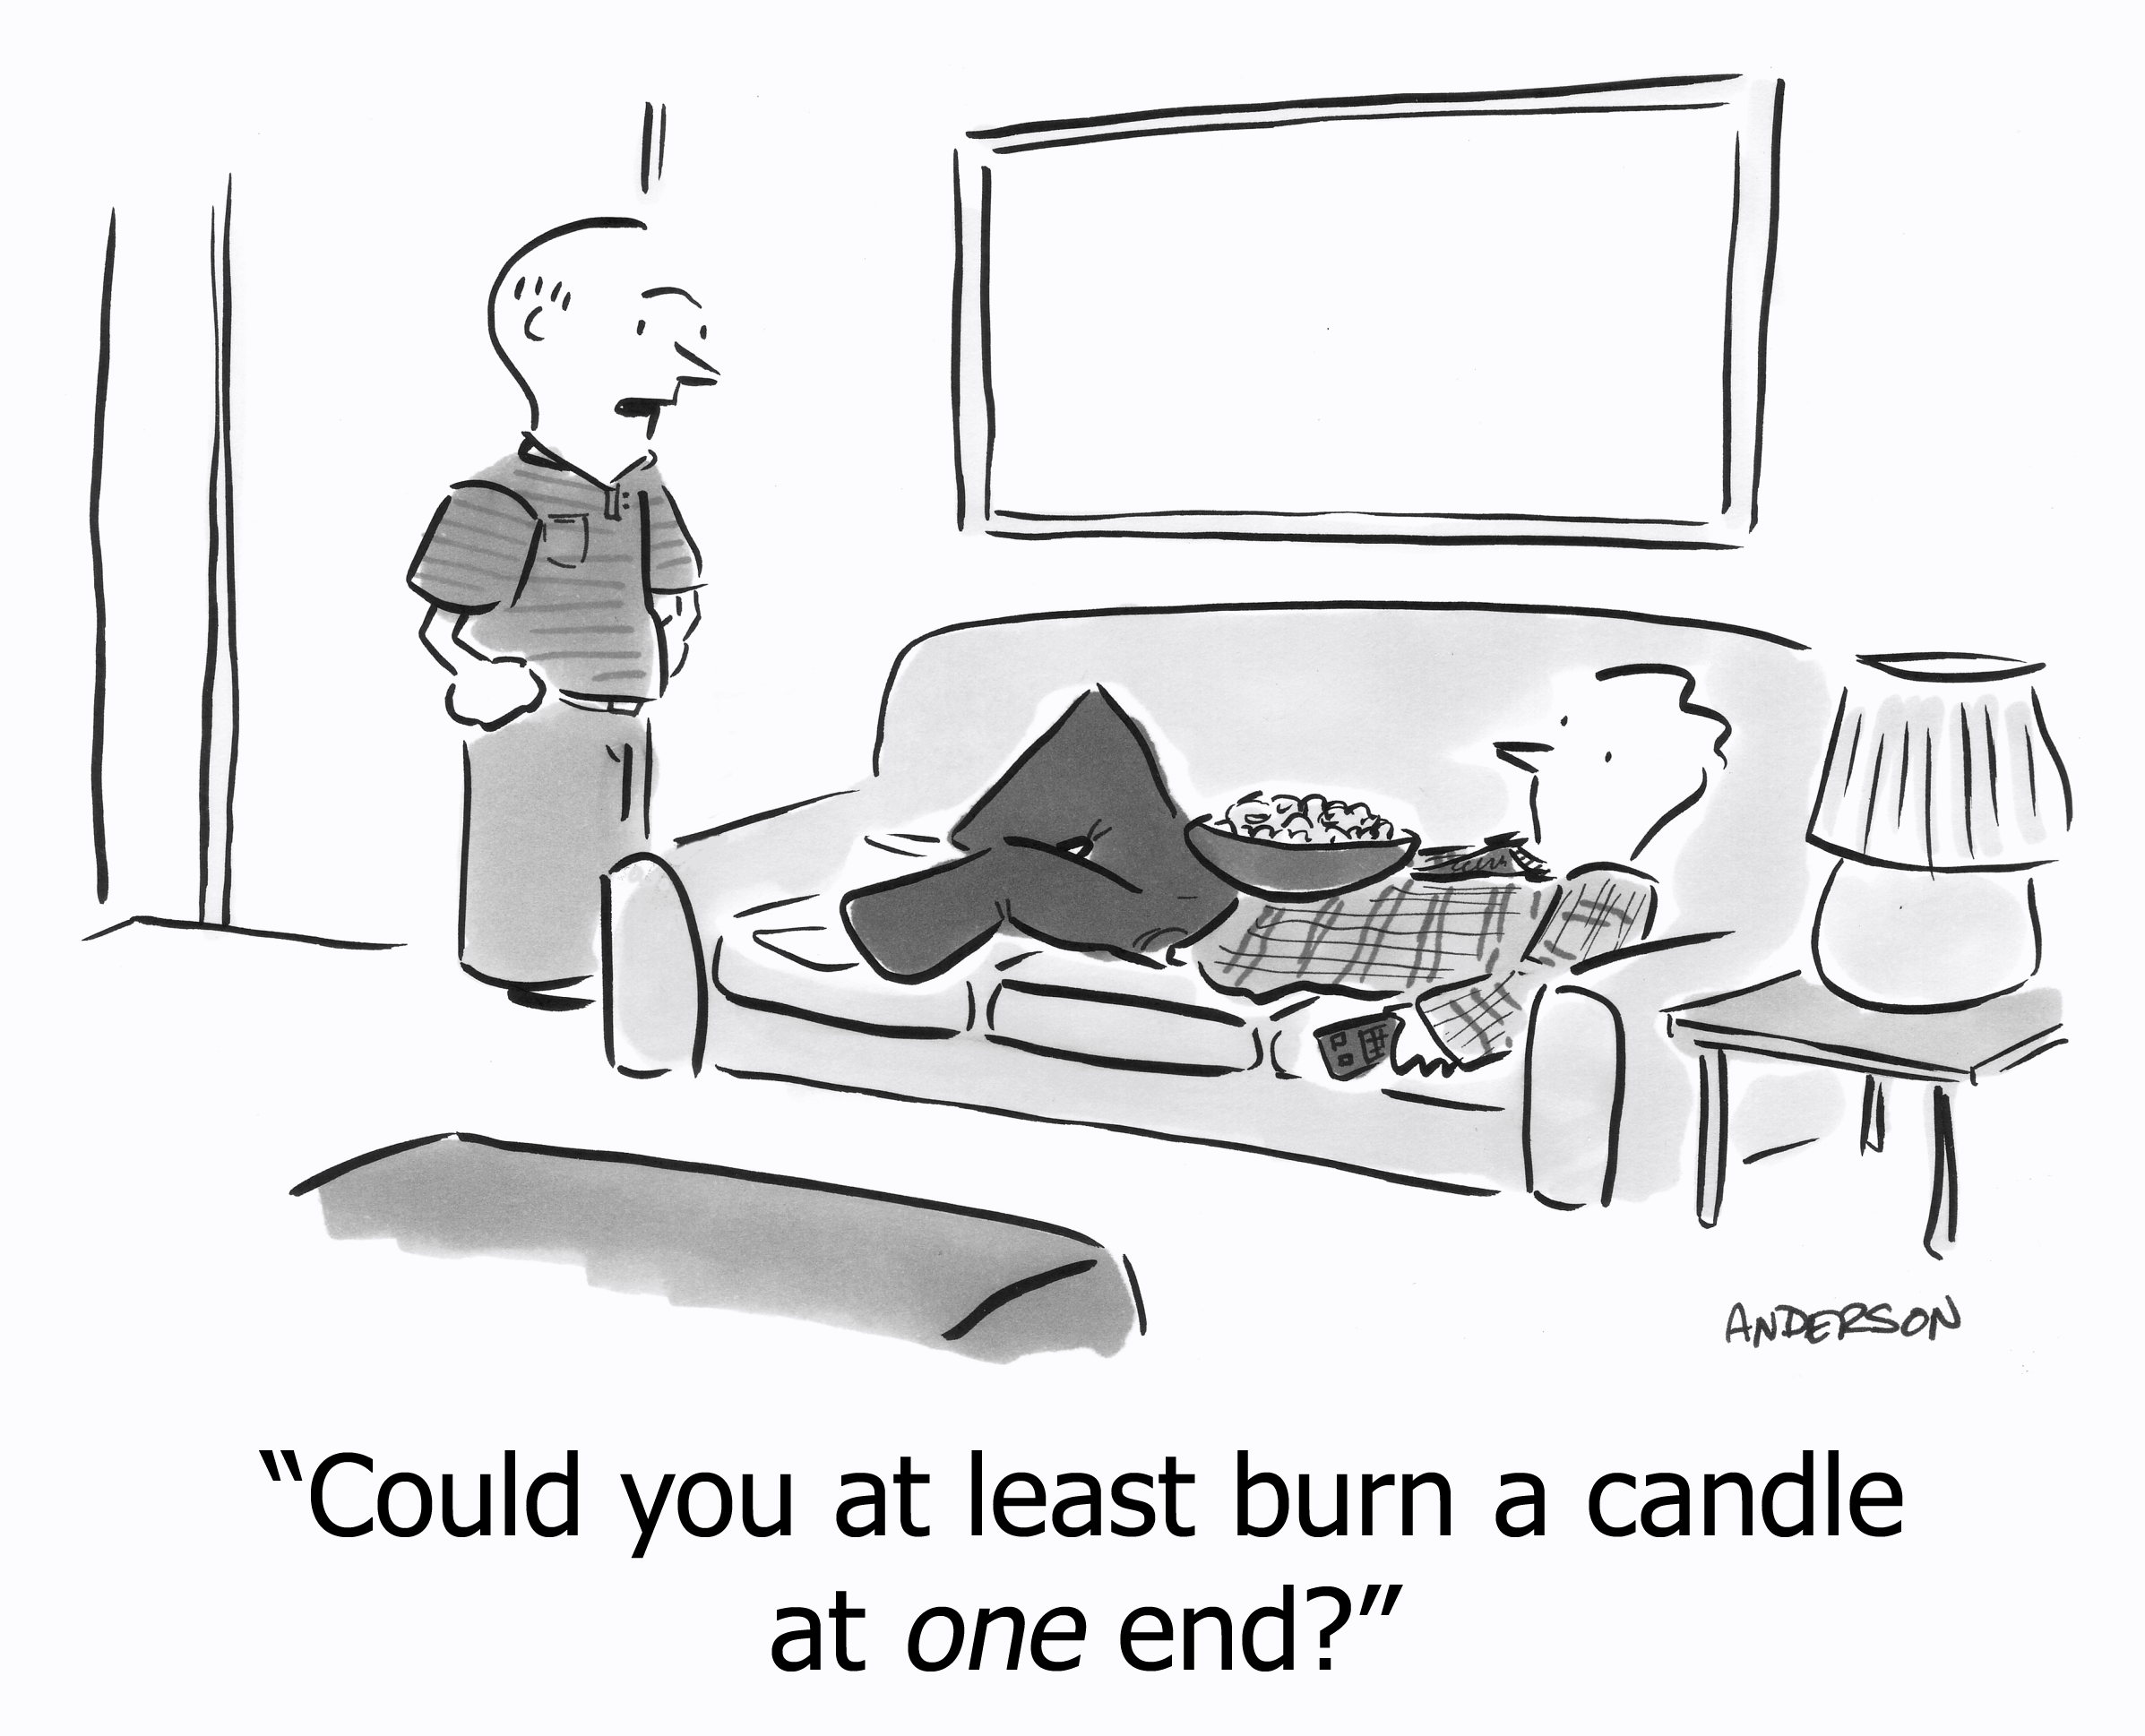 Could you at least burn a candle at one end?